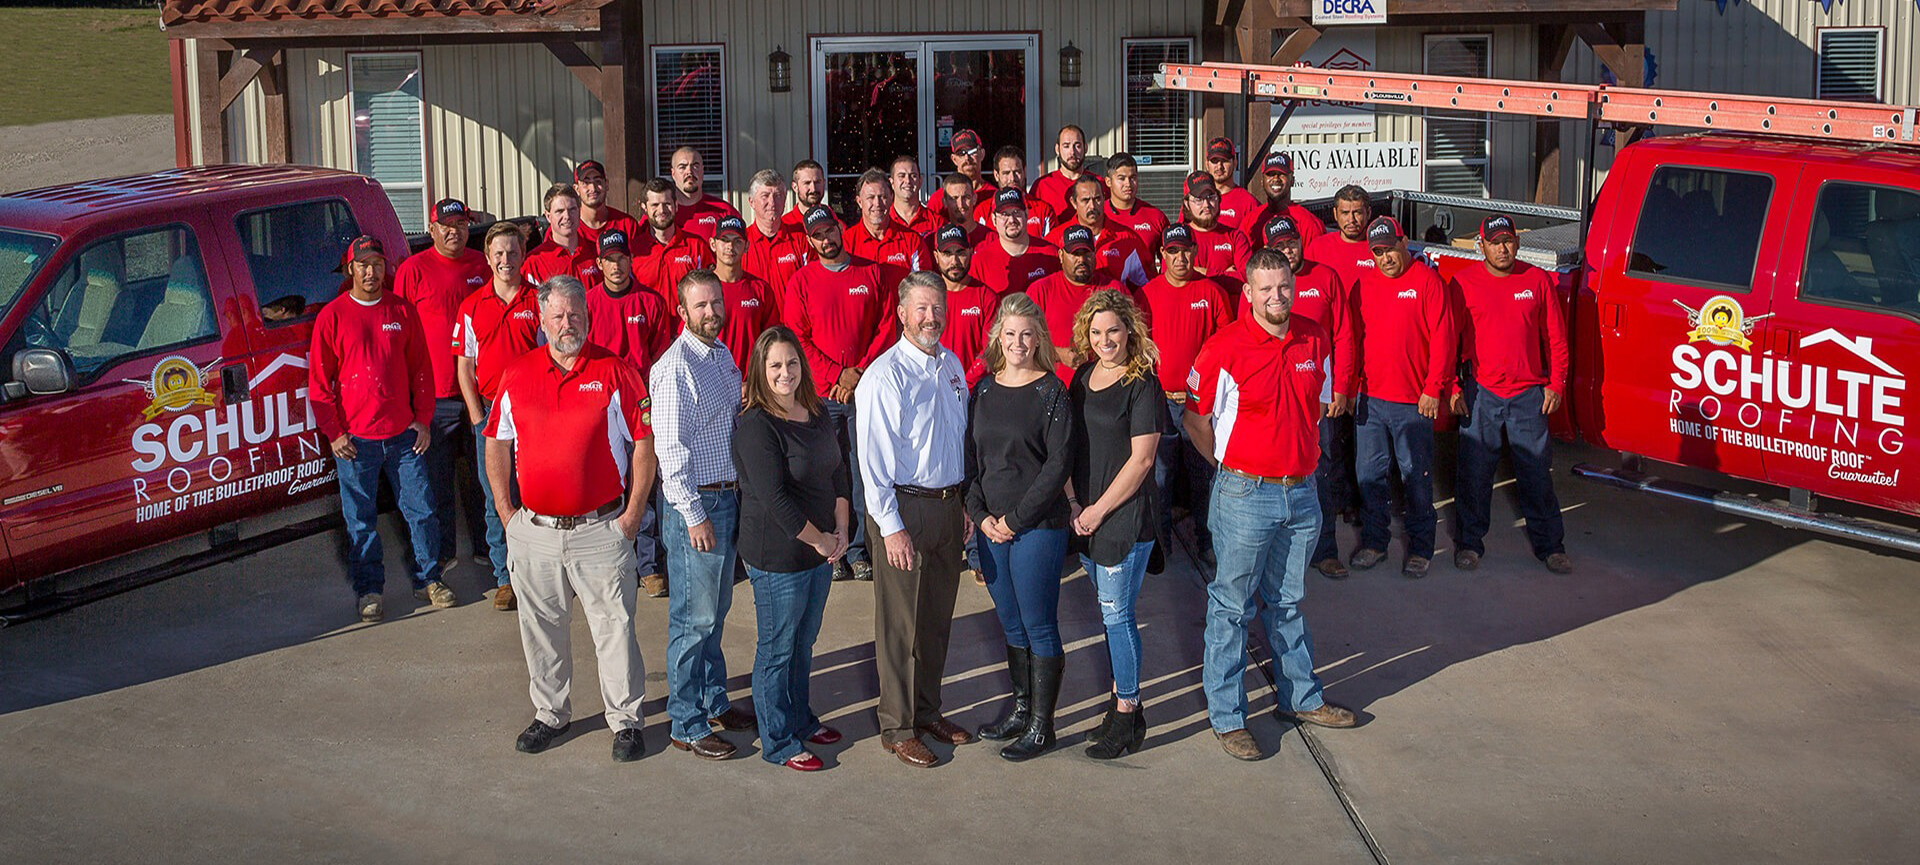 Creating Community - Team Photography - Schulte Roofing